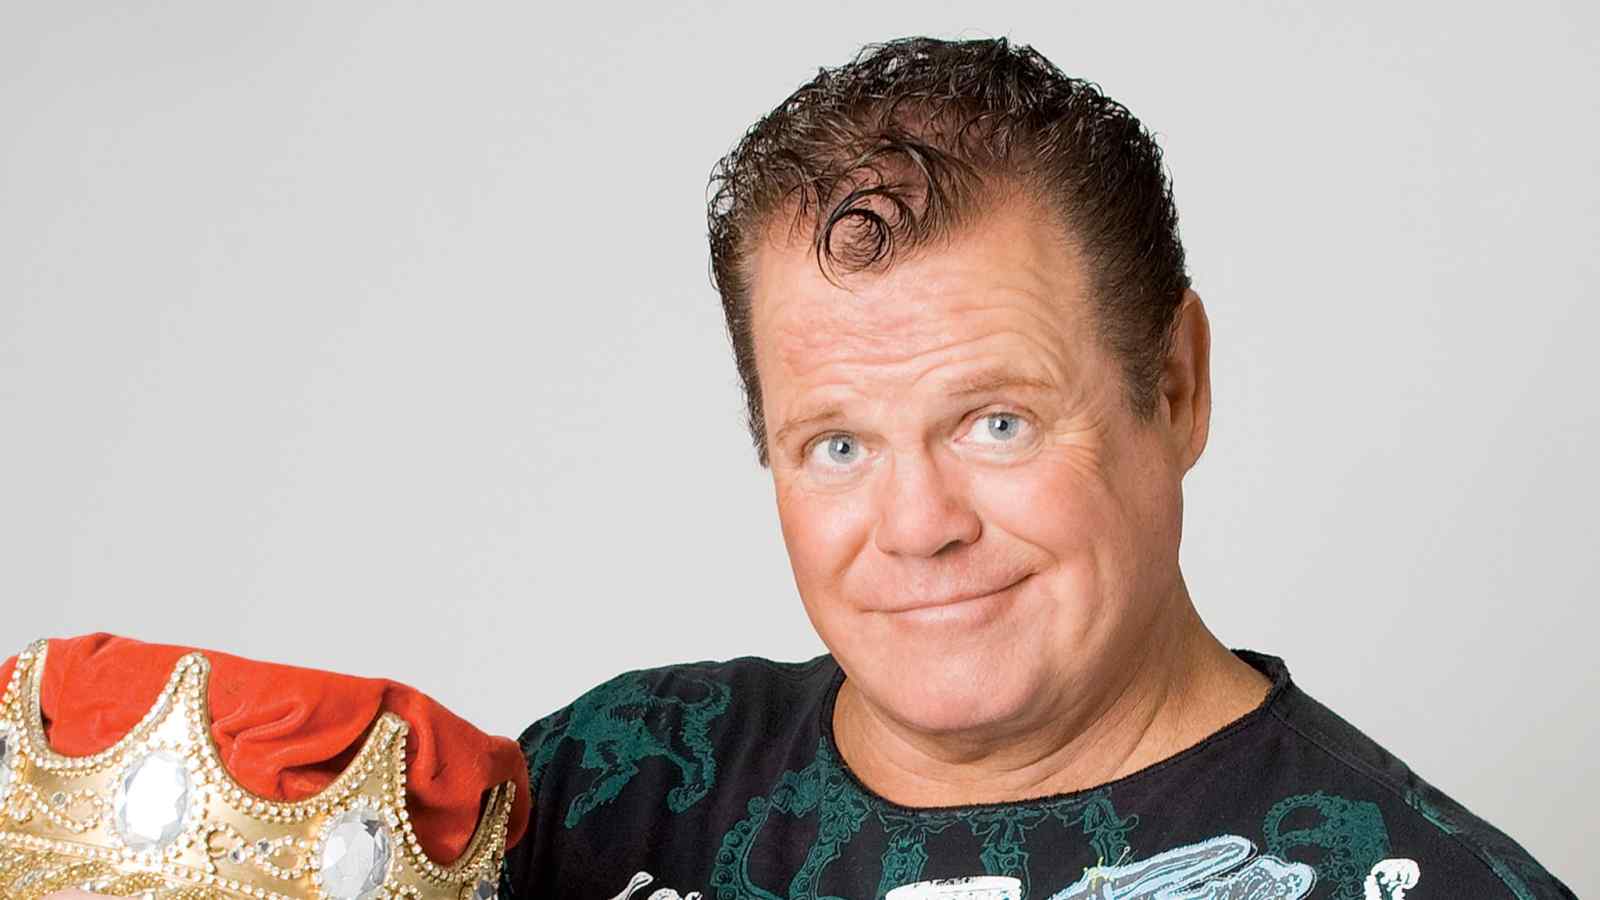 Jerry Lawler Biography: Age, Early Life, Career, Net Worth